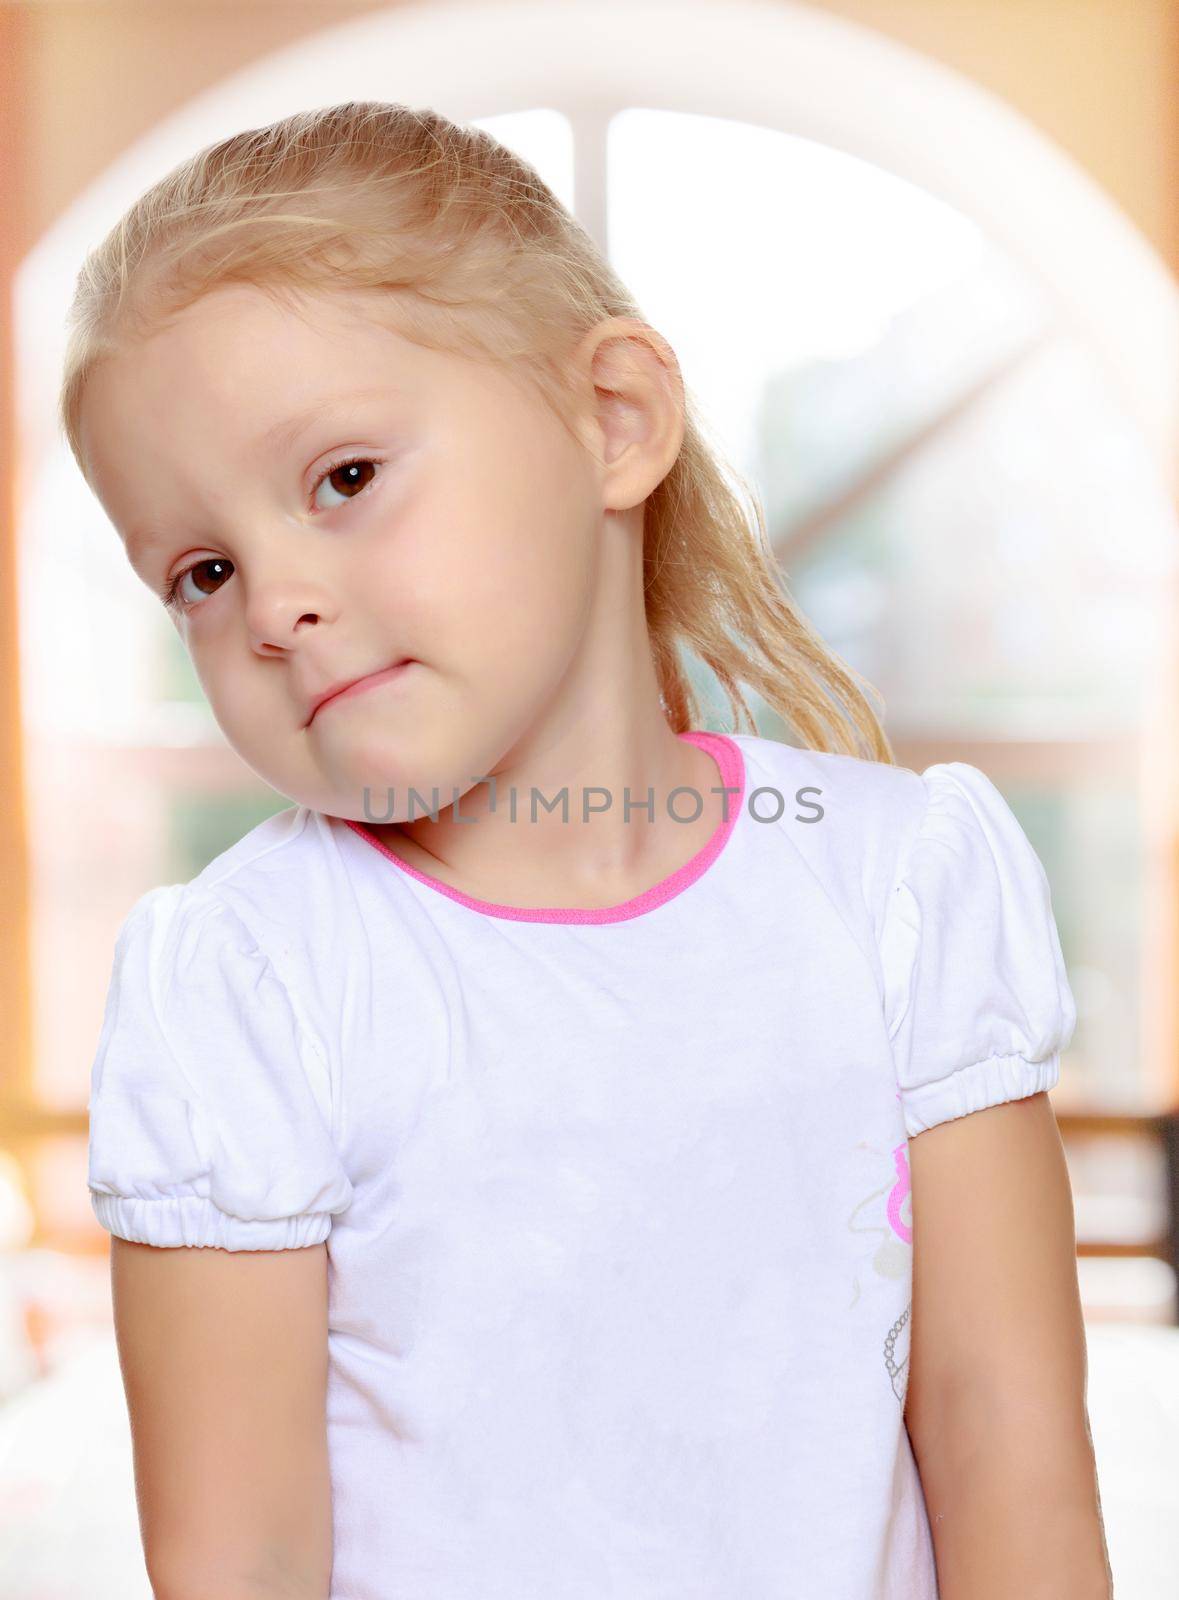 Delicate little blonde girl in a white t-shirt.